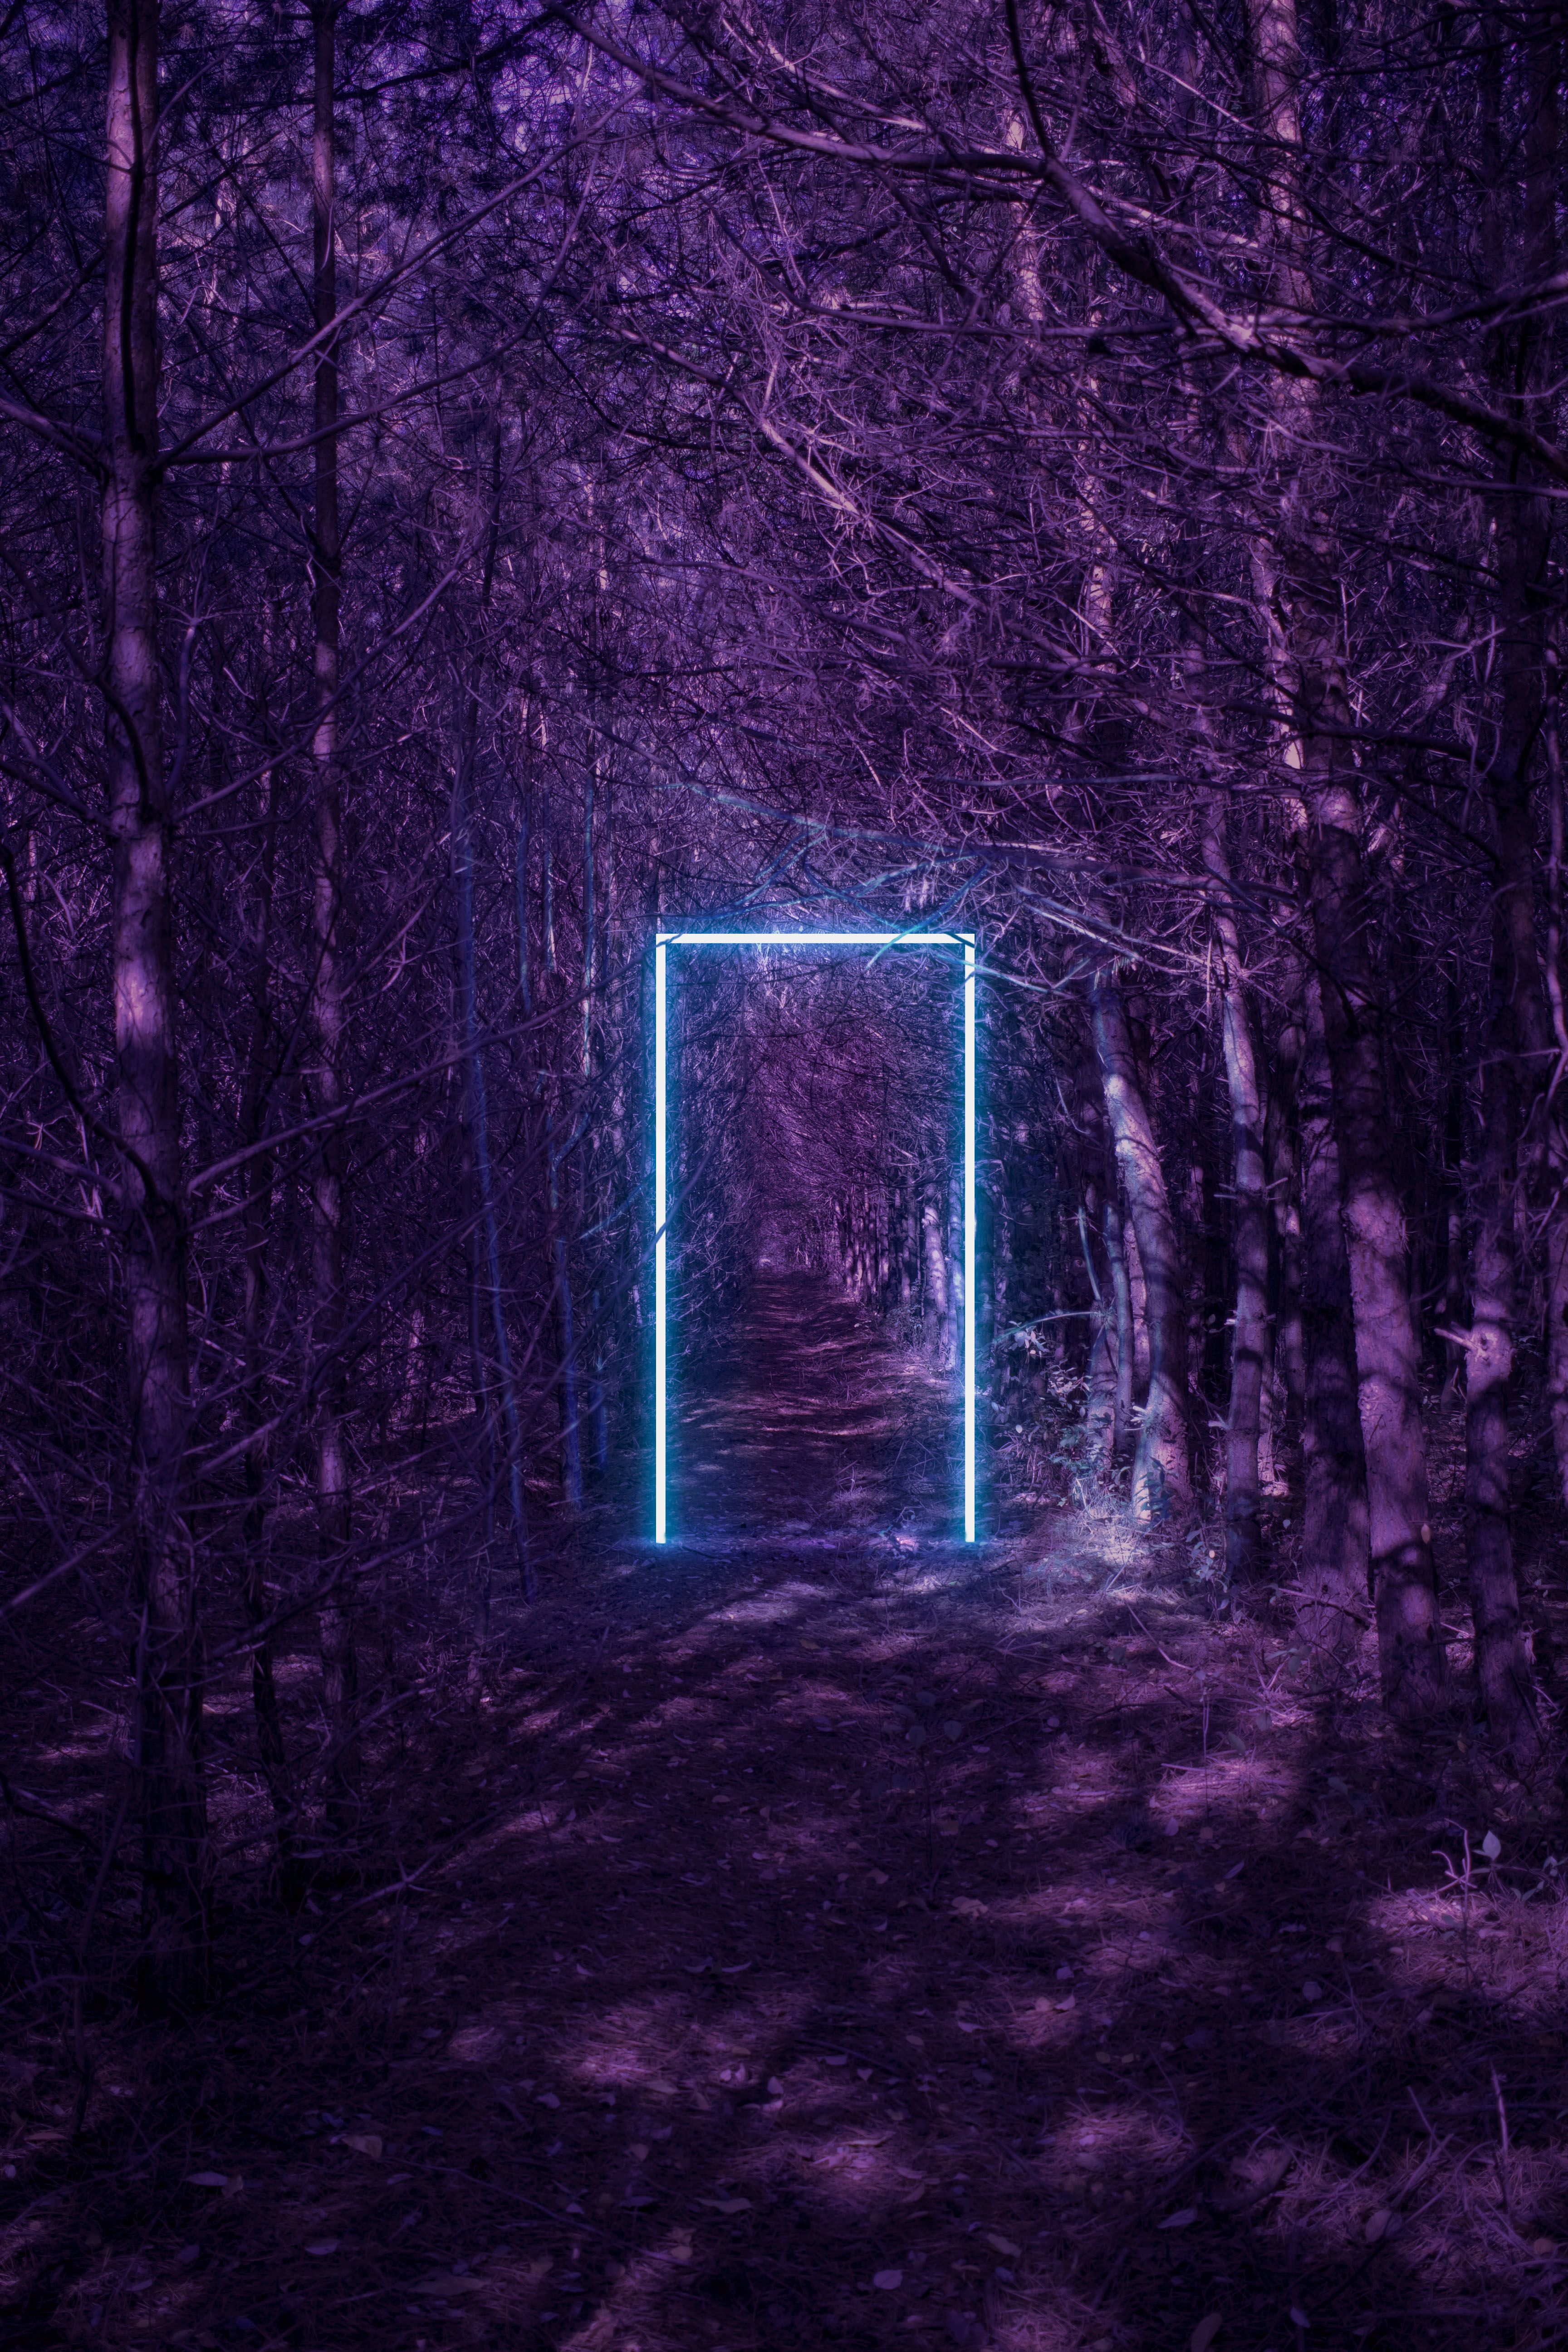 A doorway made of neon lights in the middle of a forest